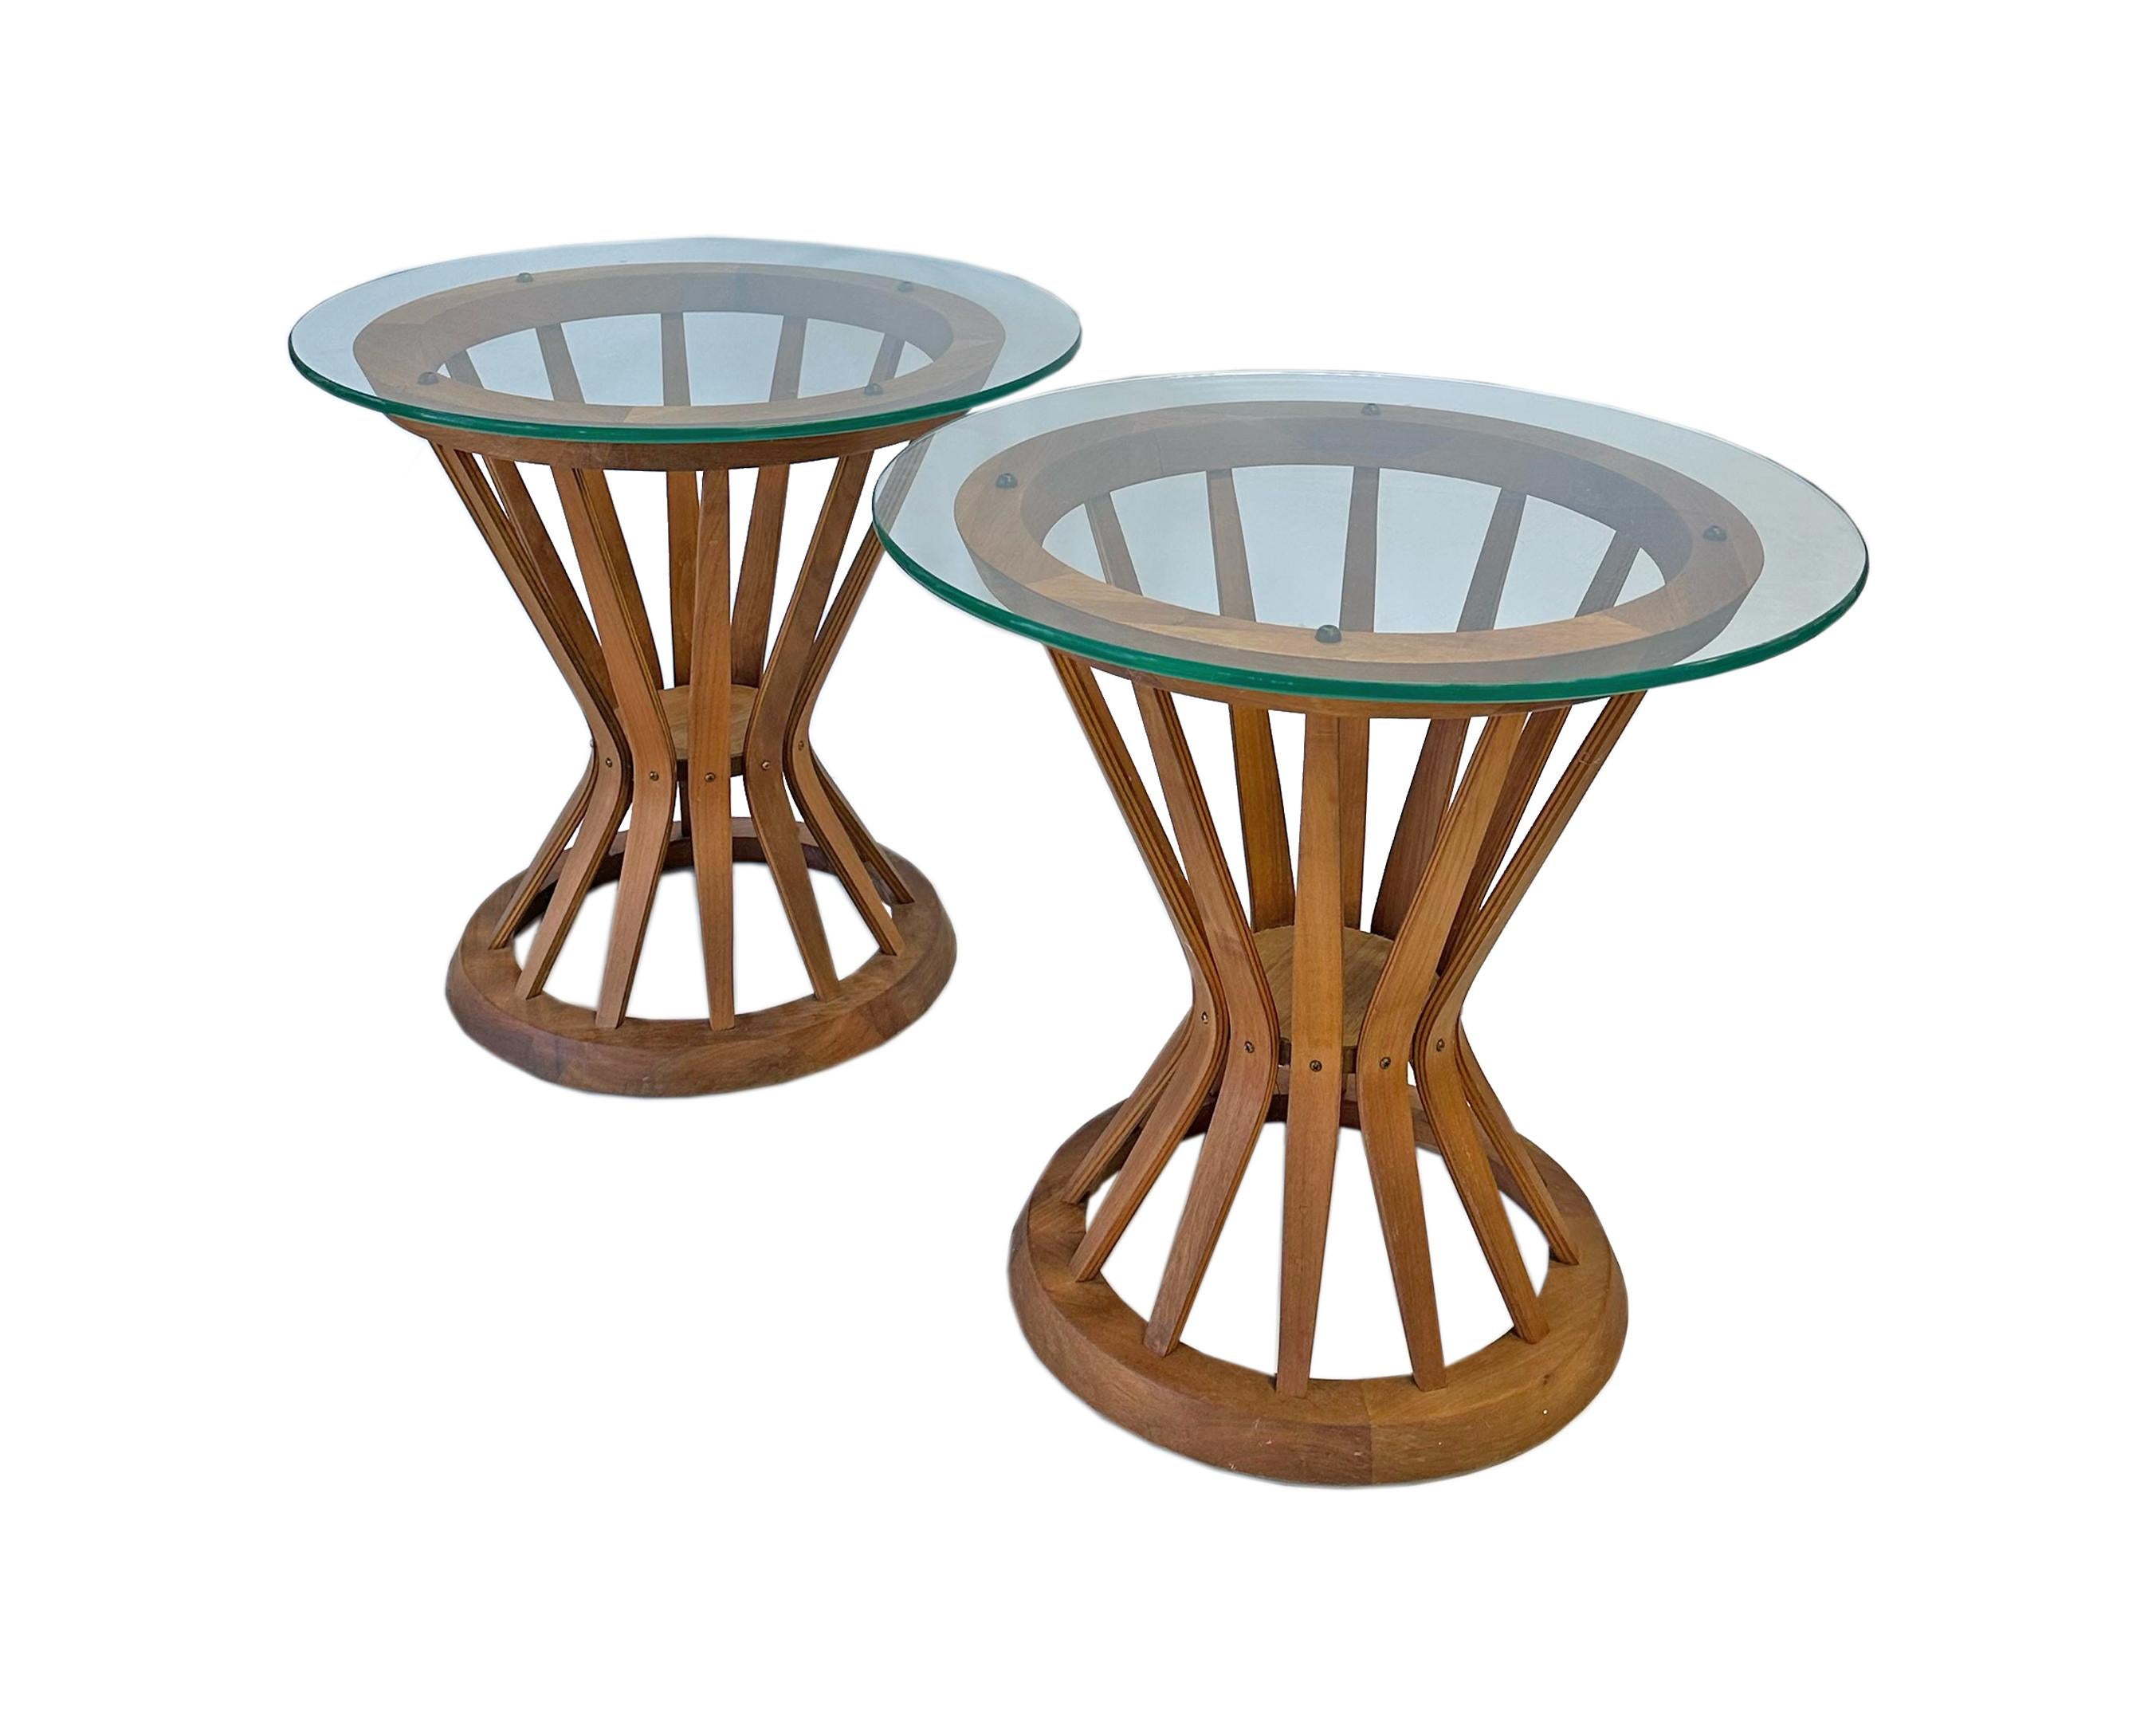 A pair of Sheaf of Wheat side tables designed by the American designer Edward Wormley (1907-1995) for Dunbar. These tables have an abstracted hourglass-shaped wooden base reminiscent of a sheaf of wheat. Unmarked, the top of each table is a resting